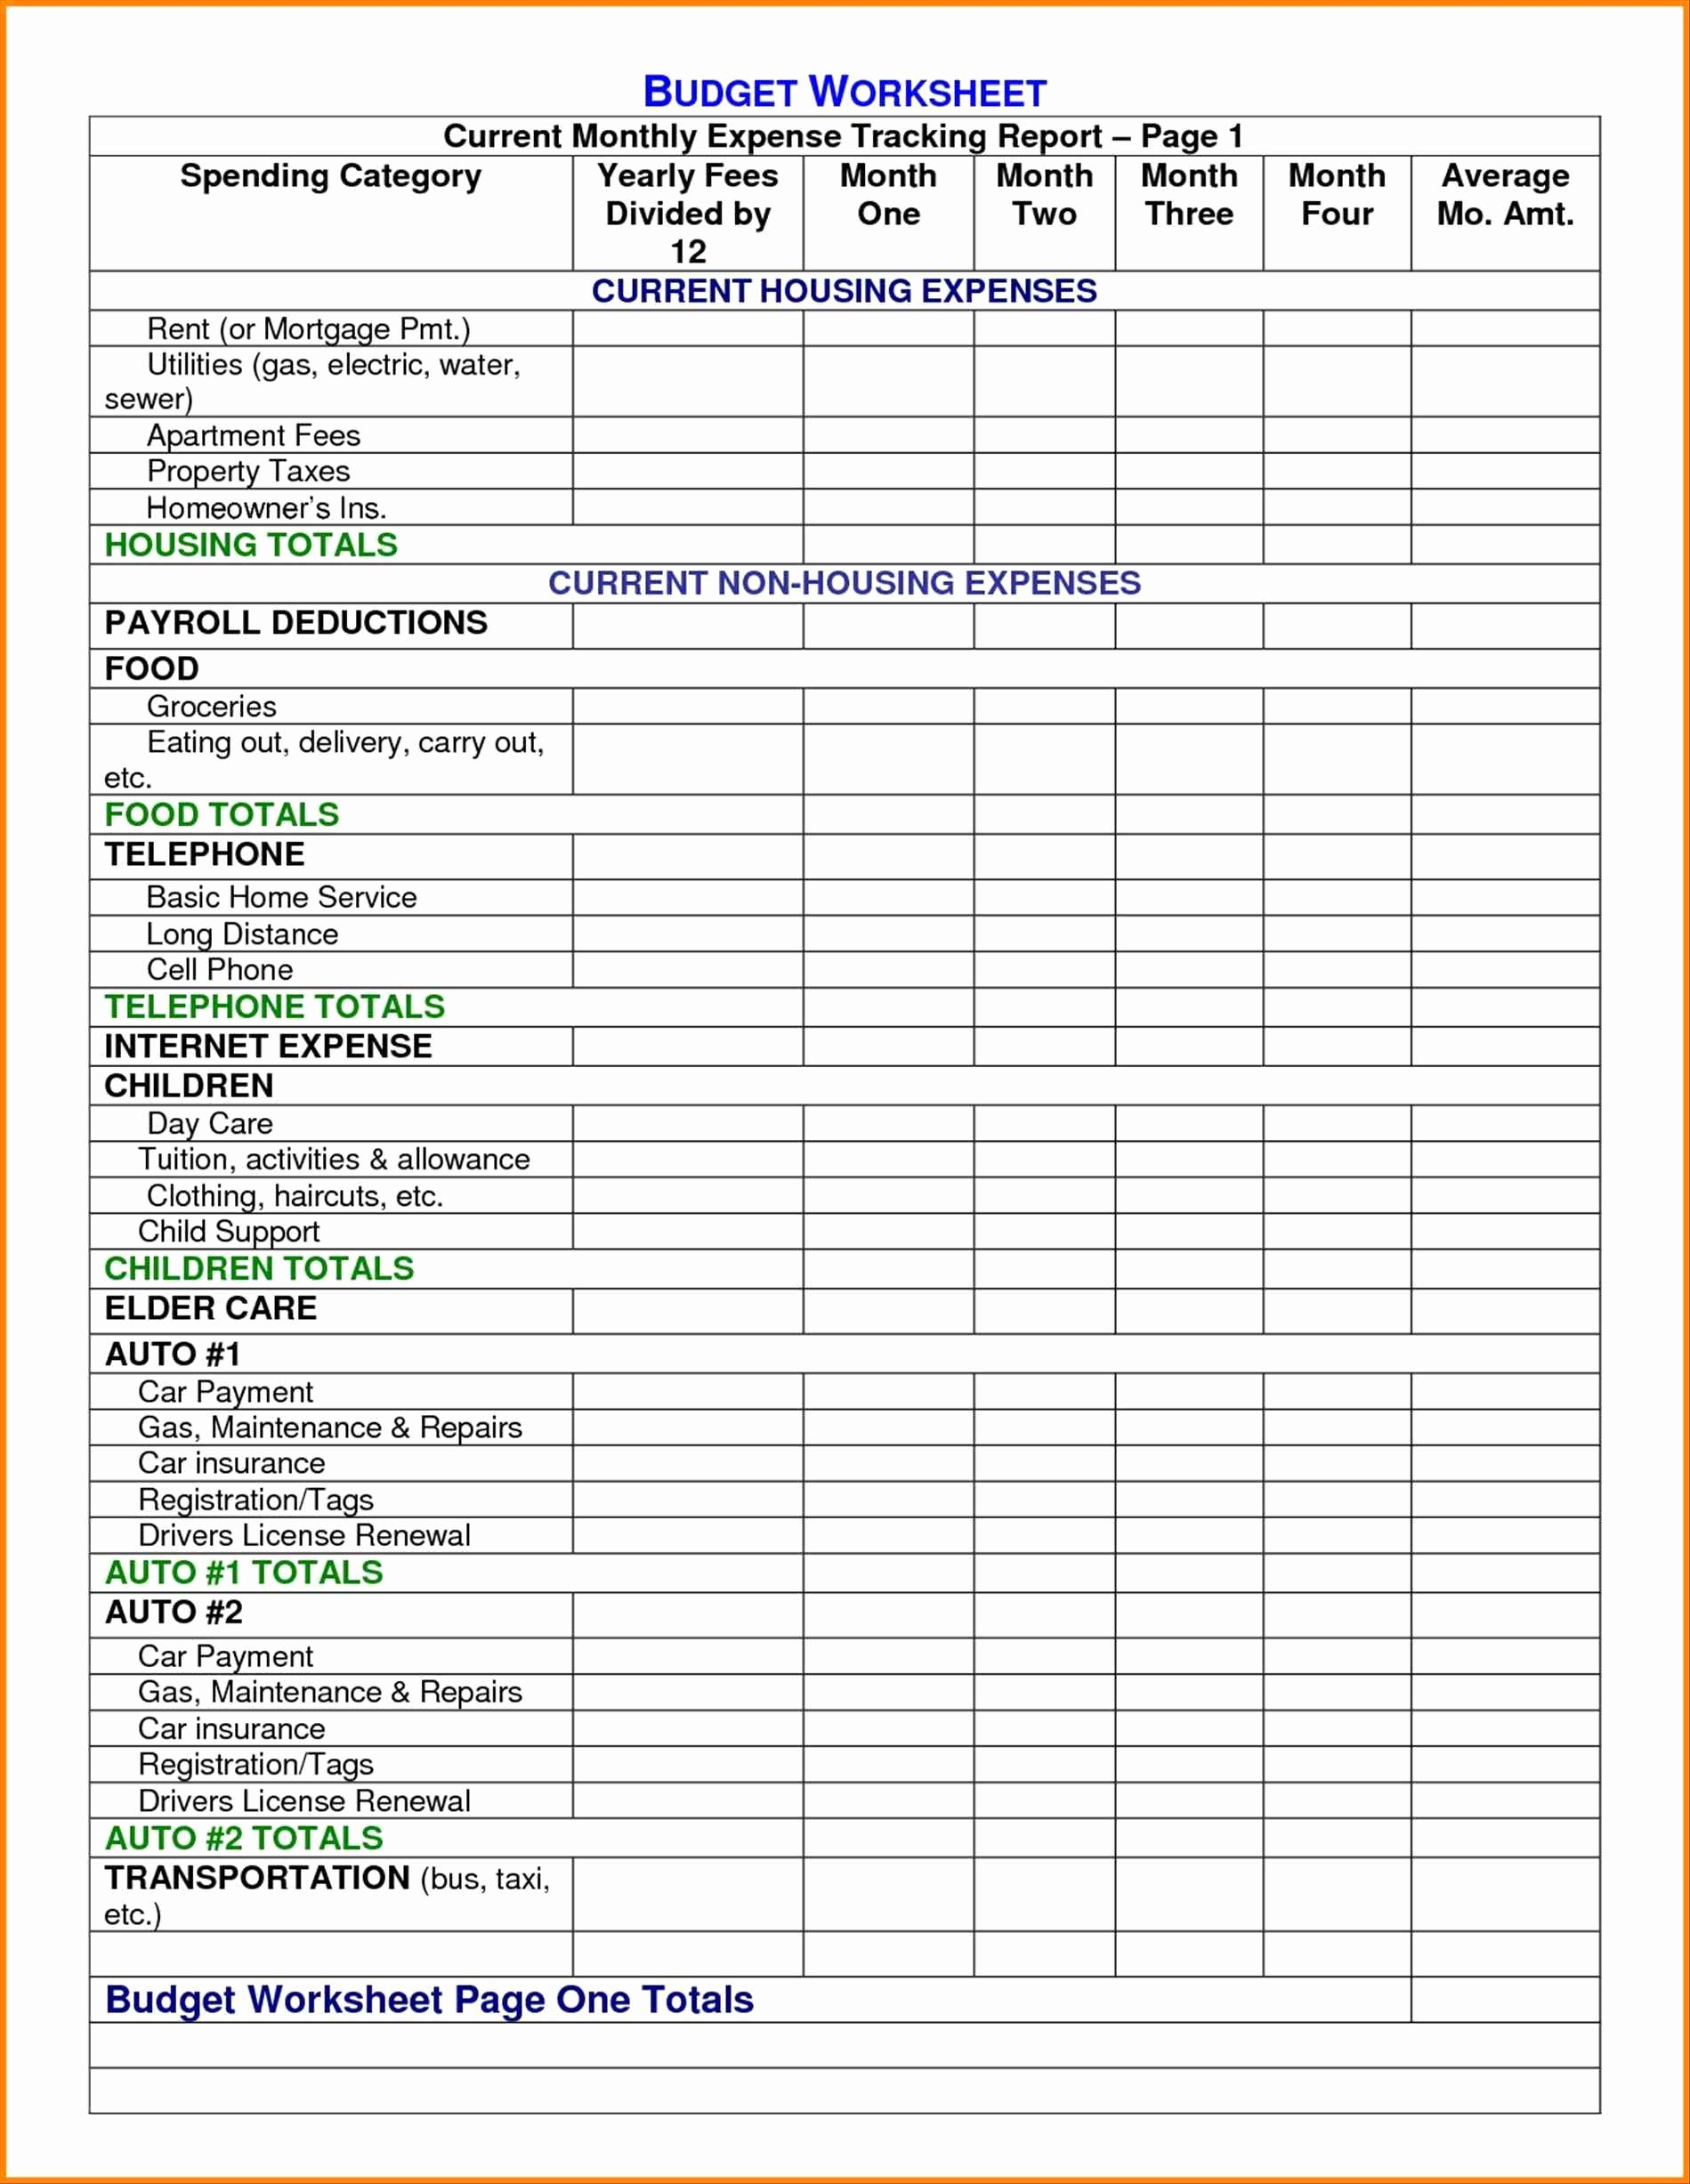 Free Taxi Driver Spreadsheet In Uber Driver Spreadsheet Awesome Free Salon Bookkeeping Spreadsheet